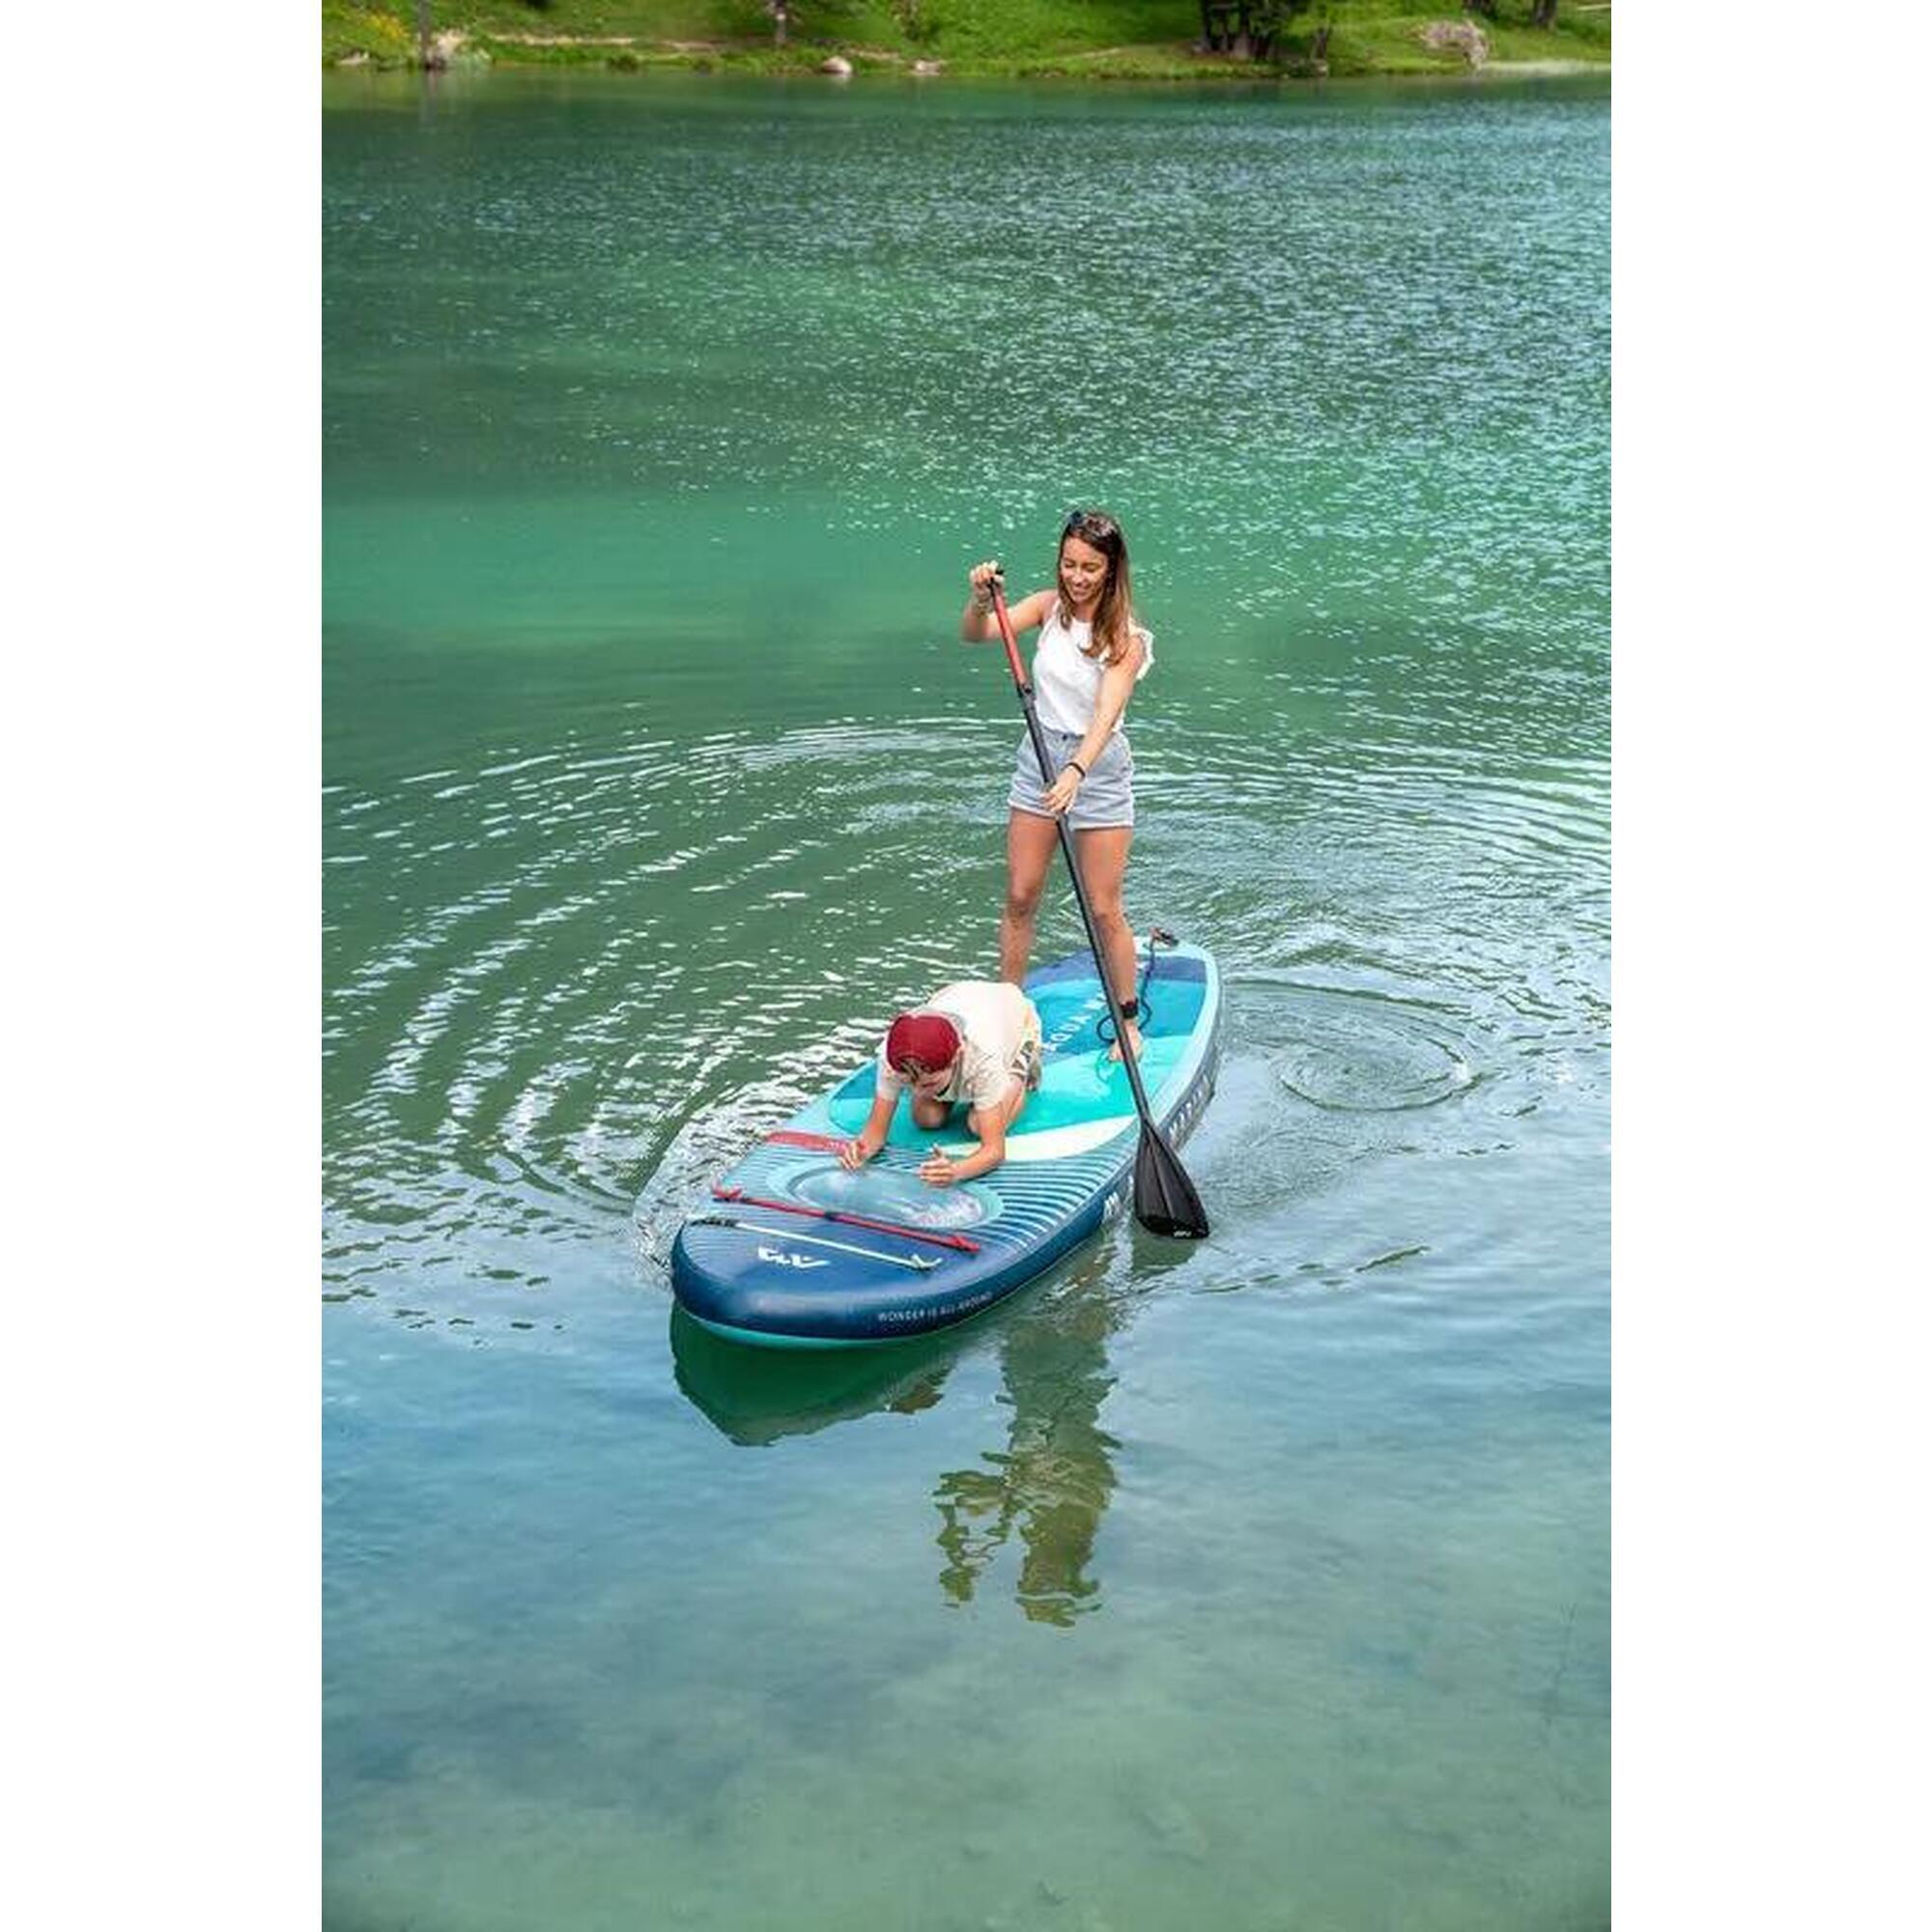 SUPER TRIP VIEW family snorkeling SUP board - Green